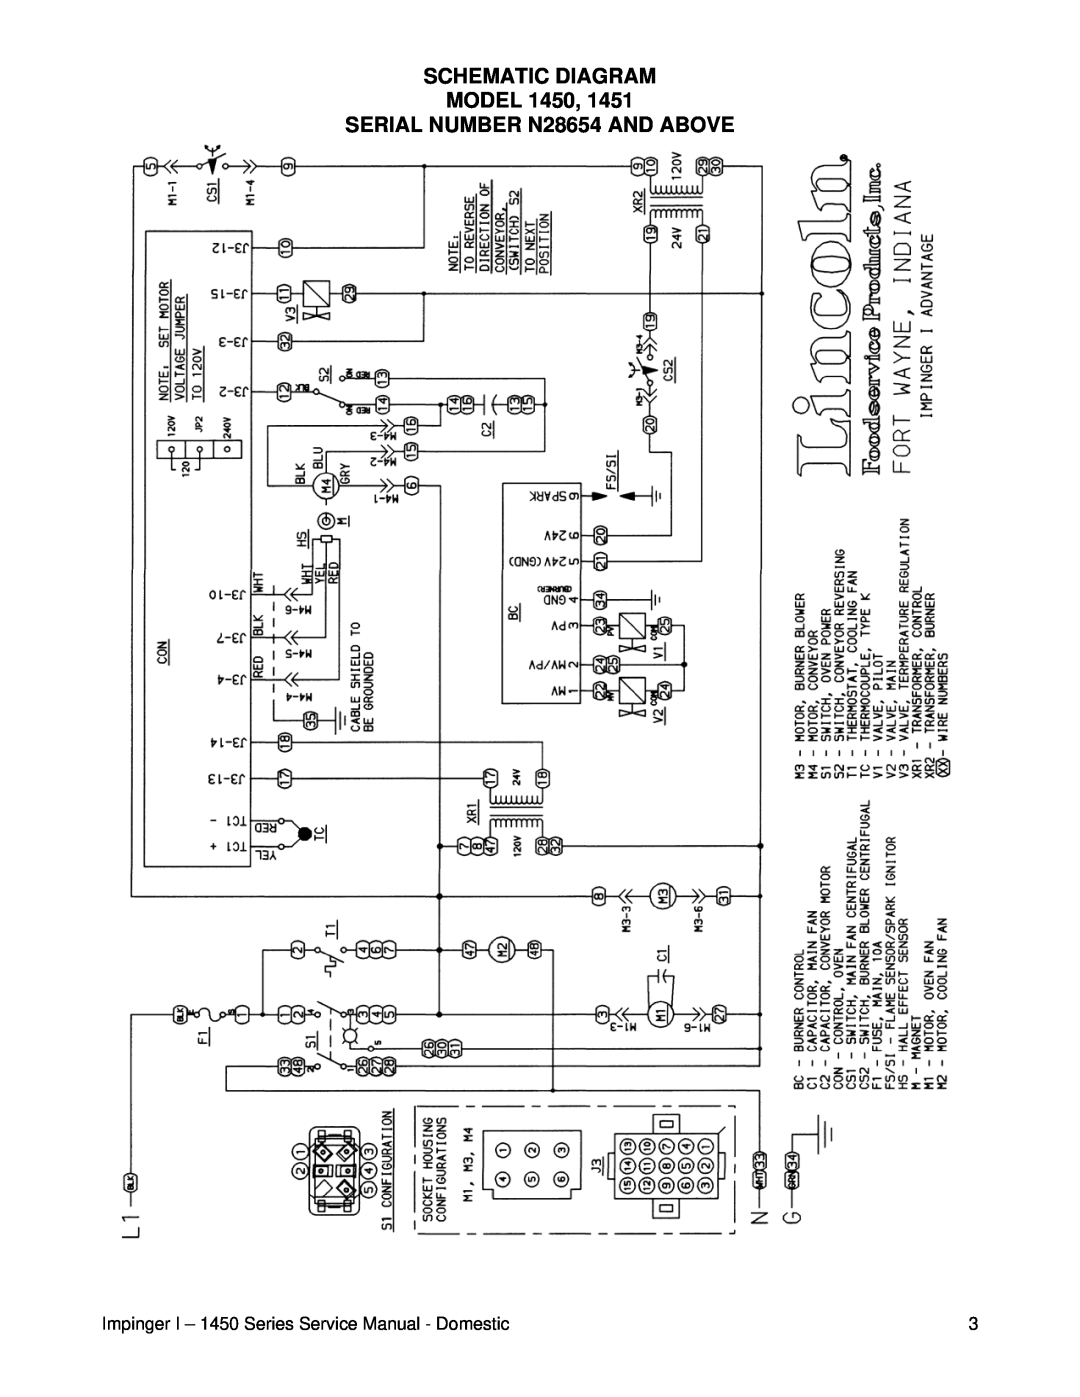 Lincoln 1451 service manual SCHEMATIC DIAGRAM MODEL 1450 SERIAL NUMBER N28654 AND ABOVE 